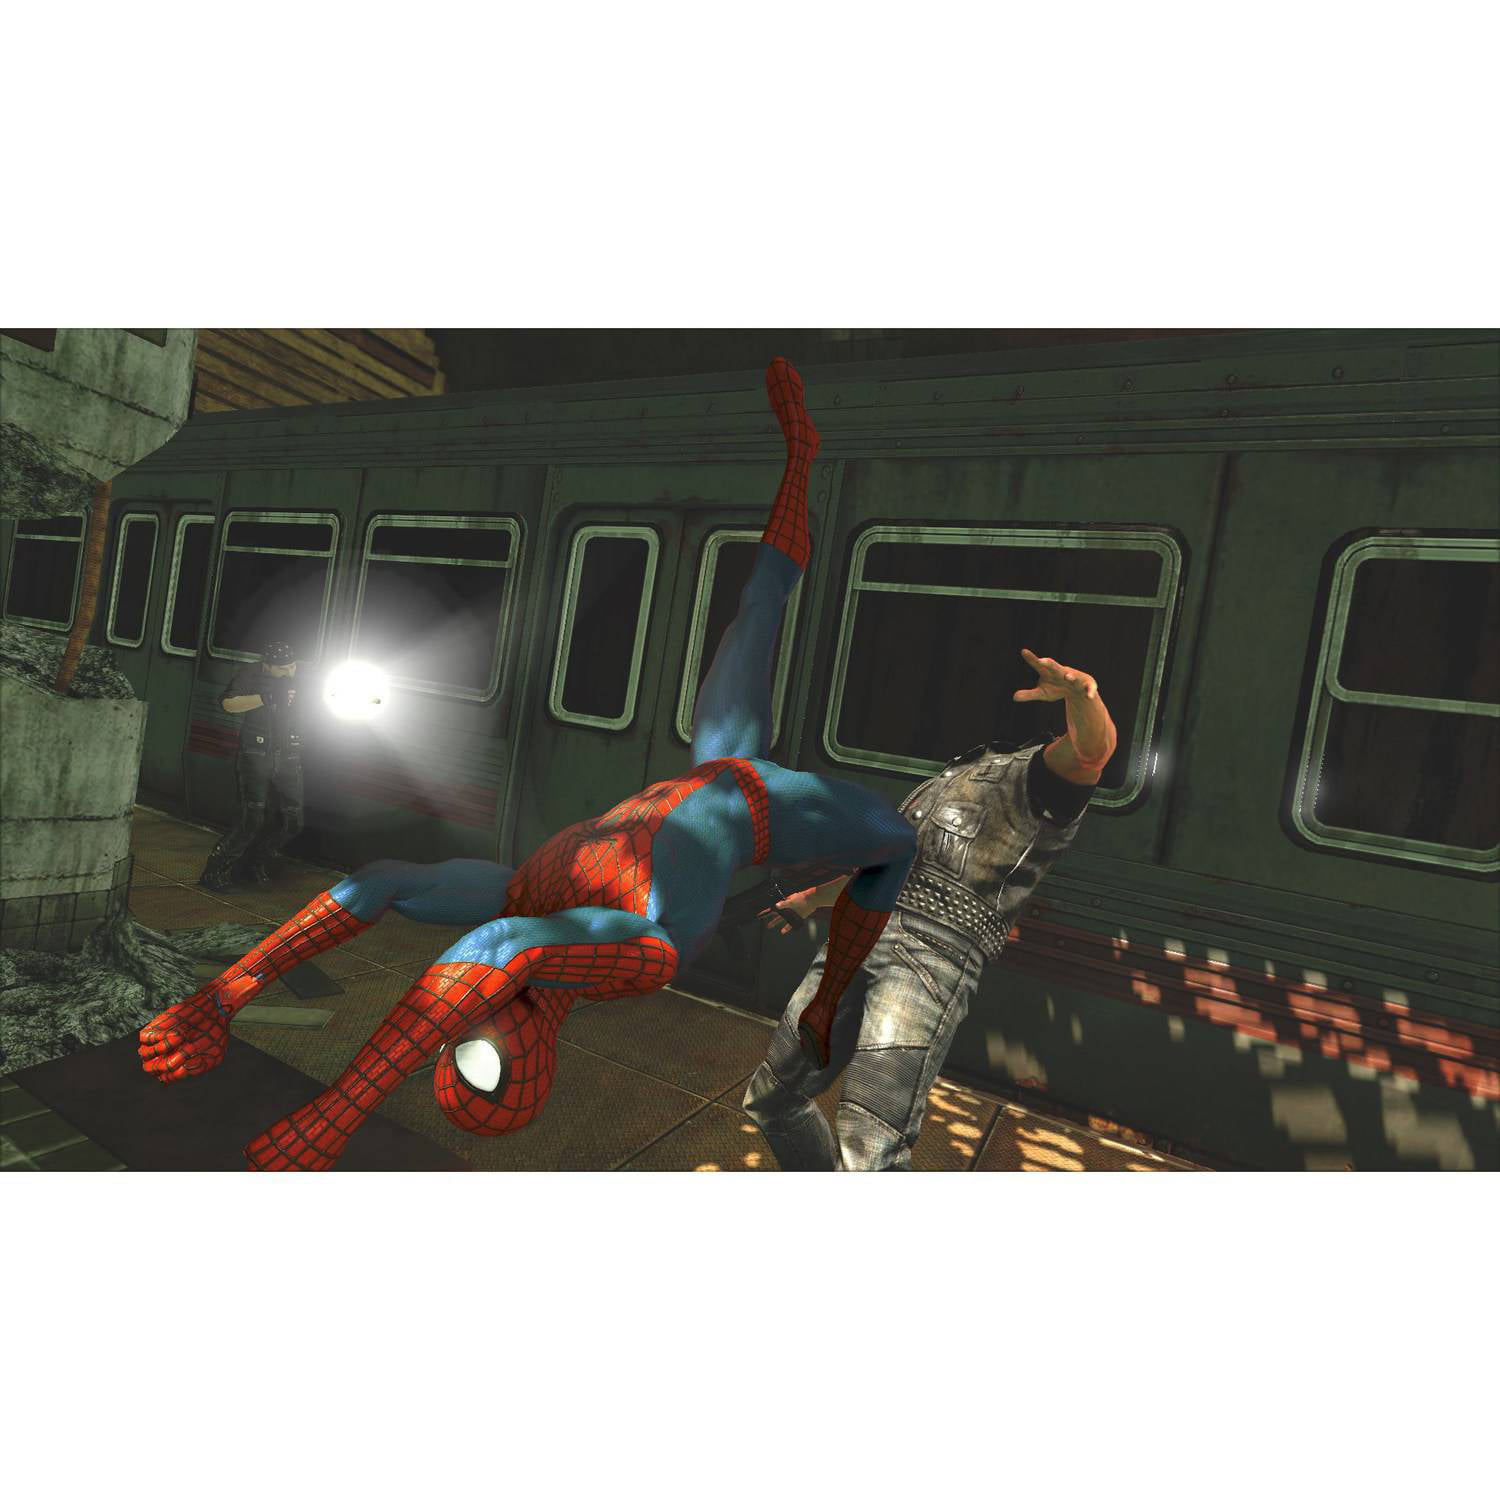 Get Inside The Amazing Spider-Man 2 - Microsoft Store